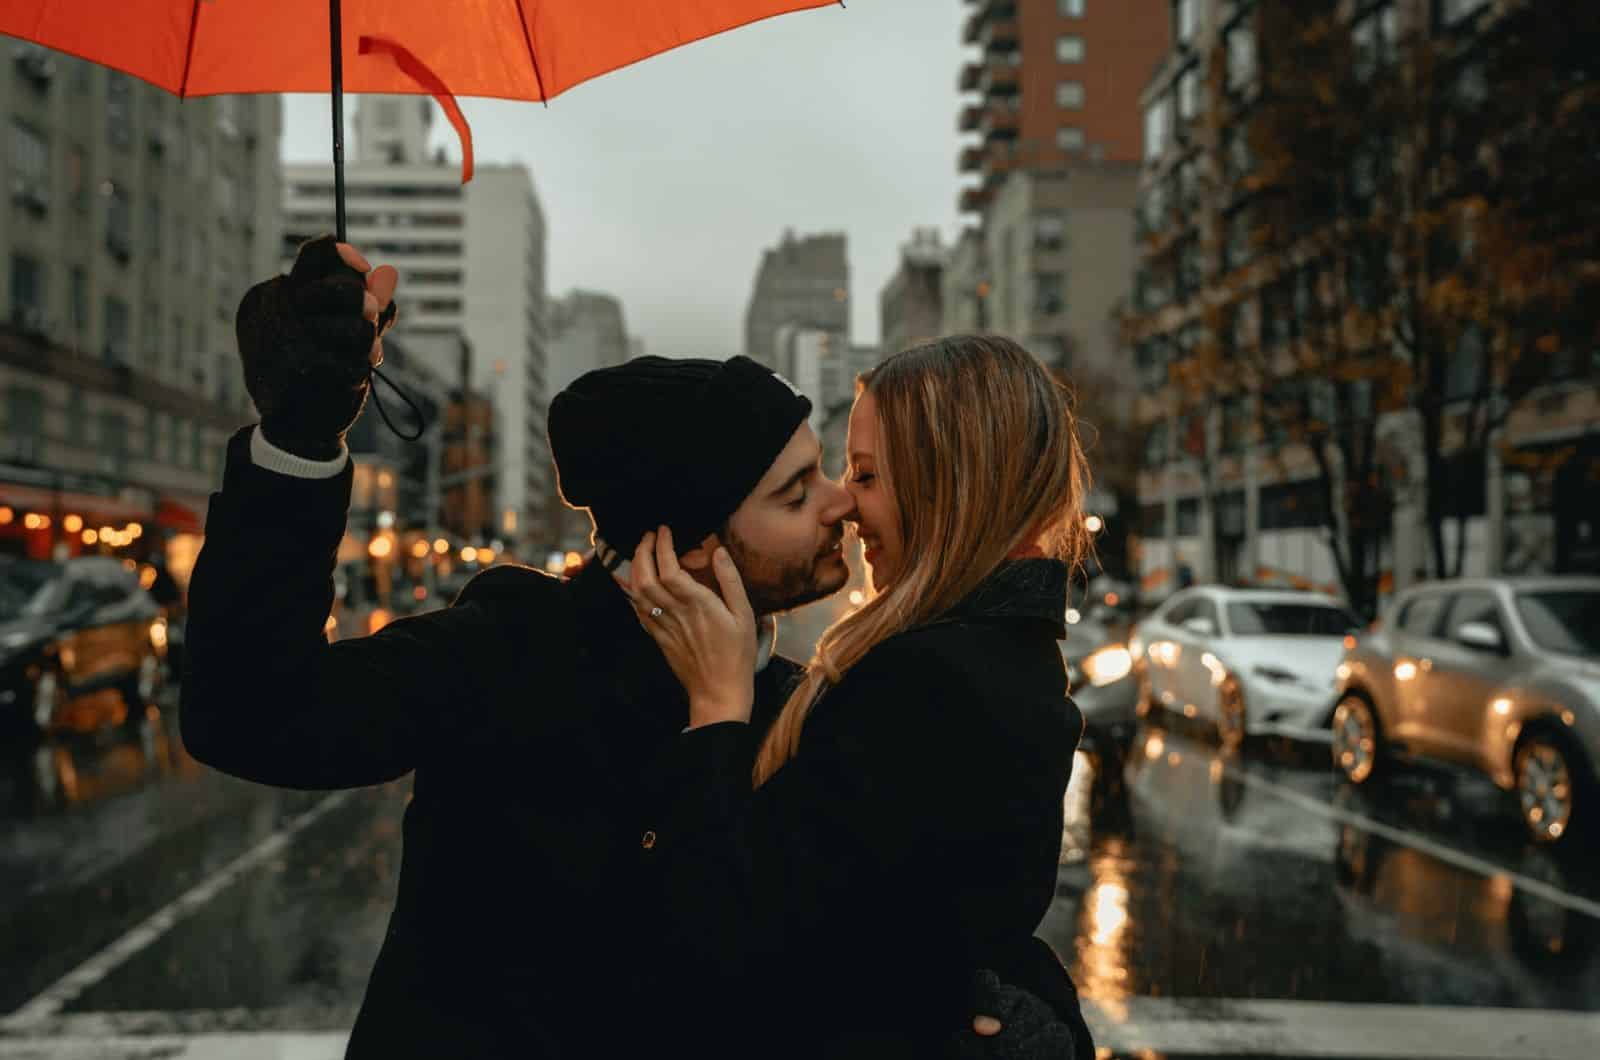 couple kissing while man holds umbrella